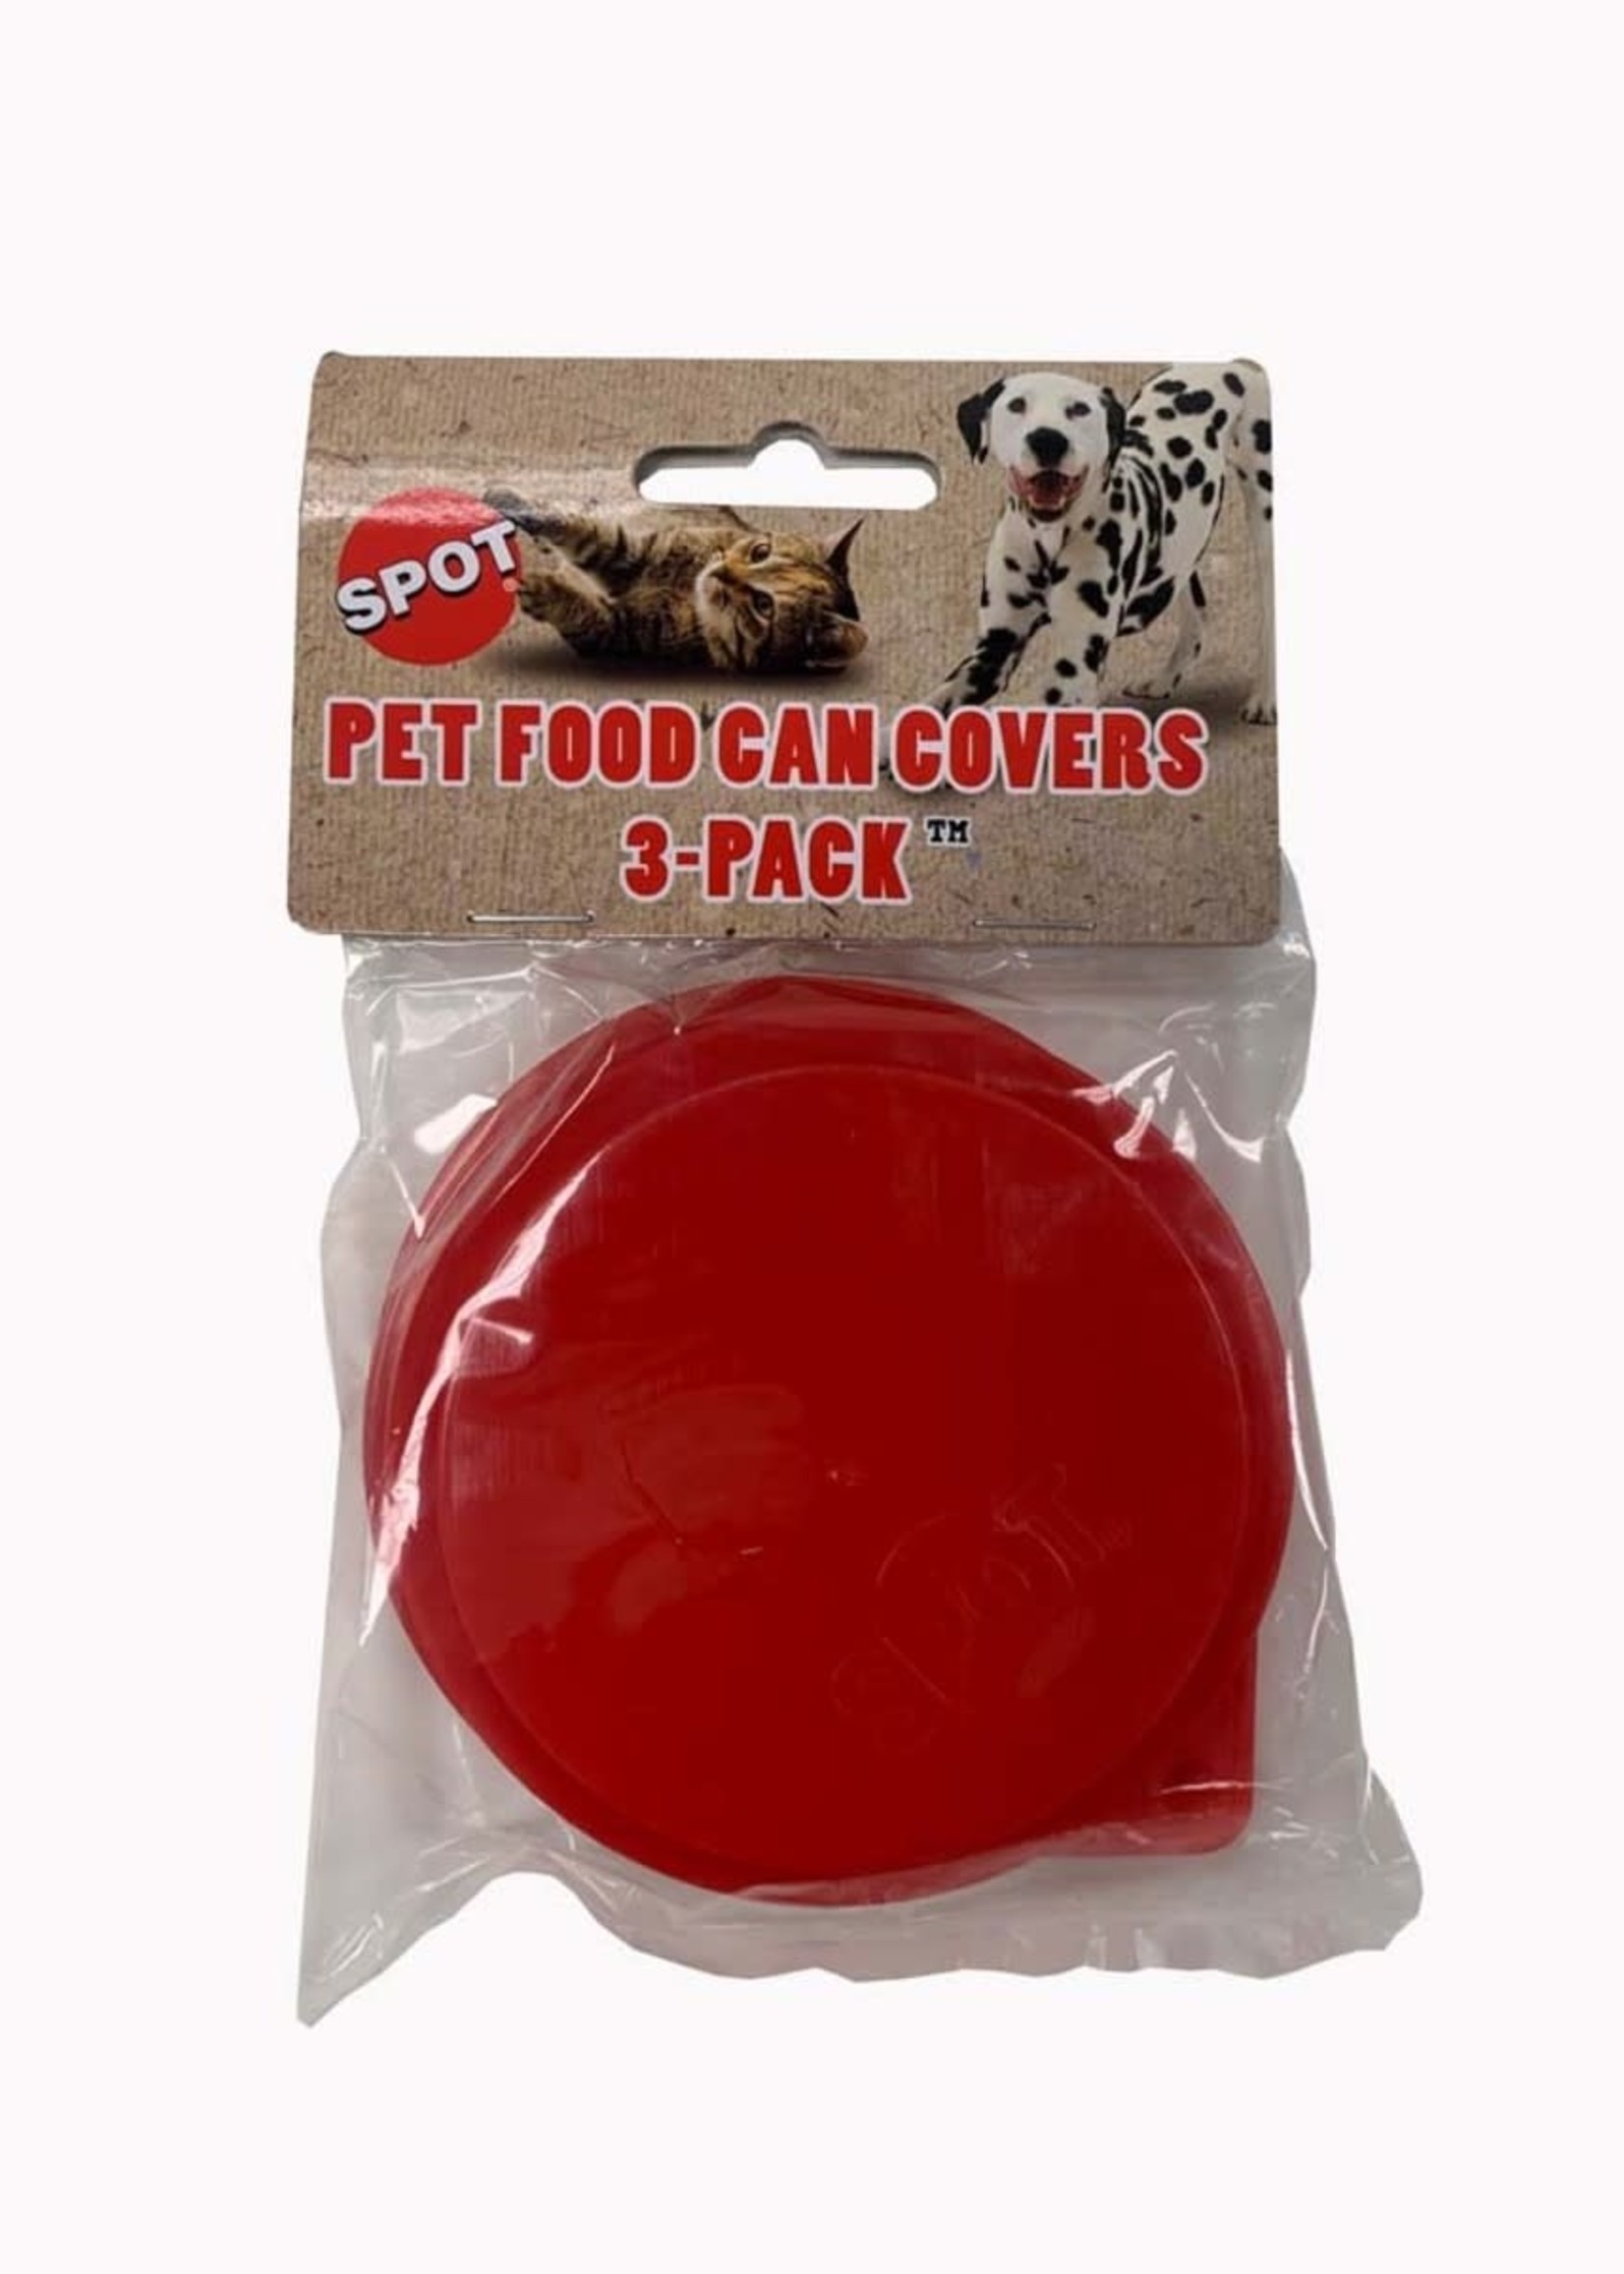 Spot Spot Pet Food Red Can Covers 3 Pack